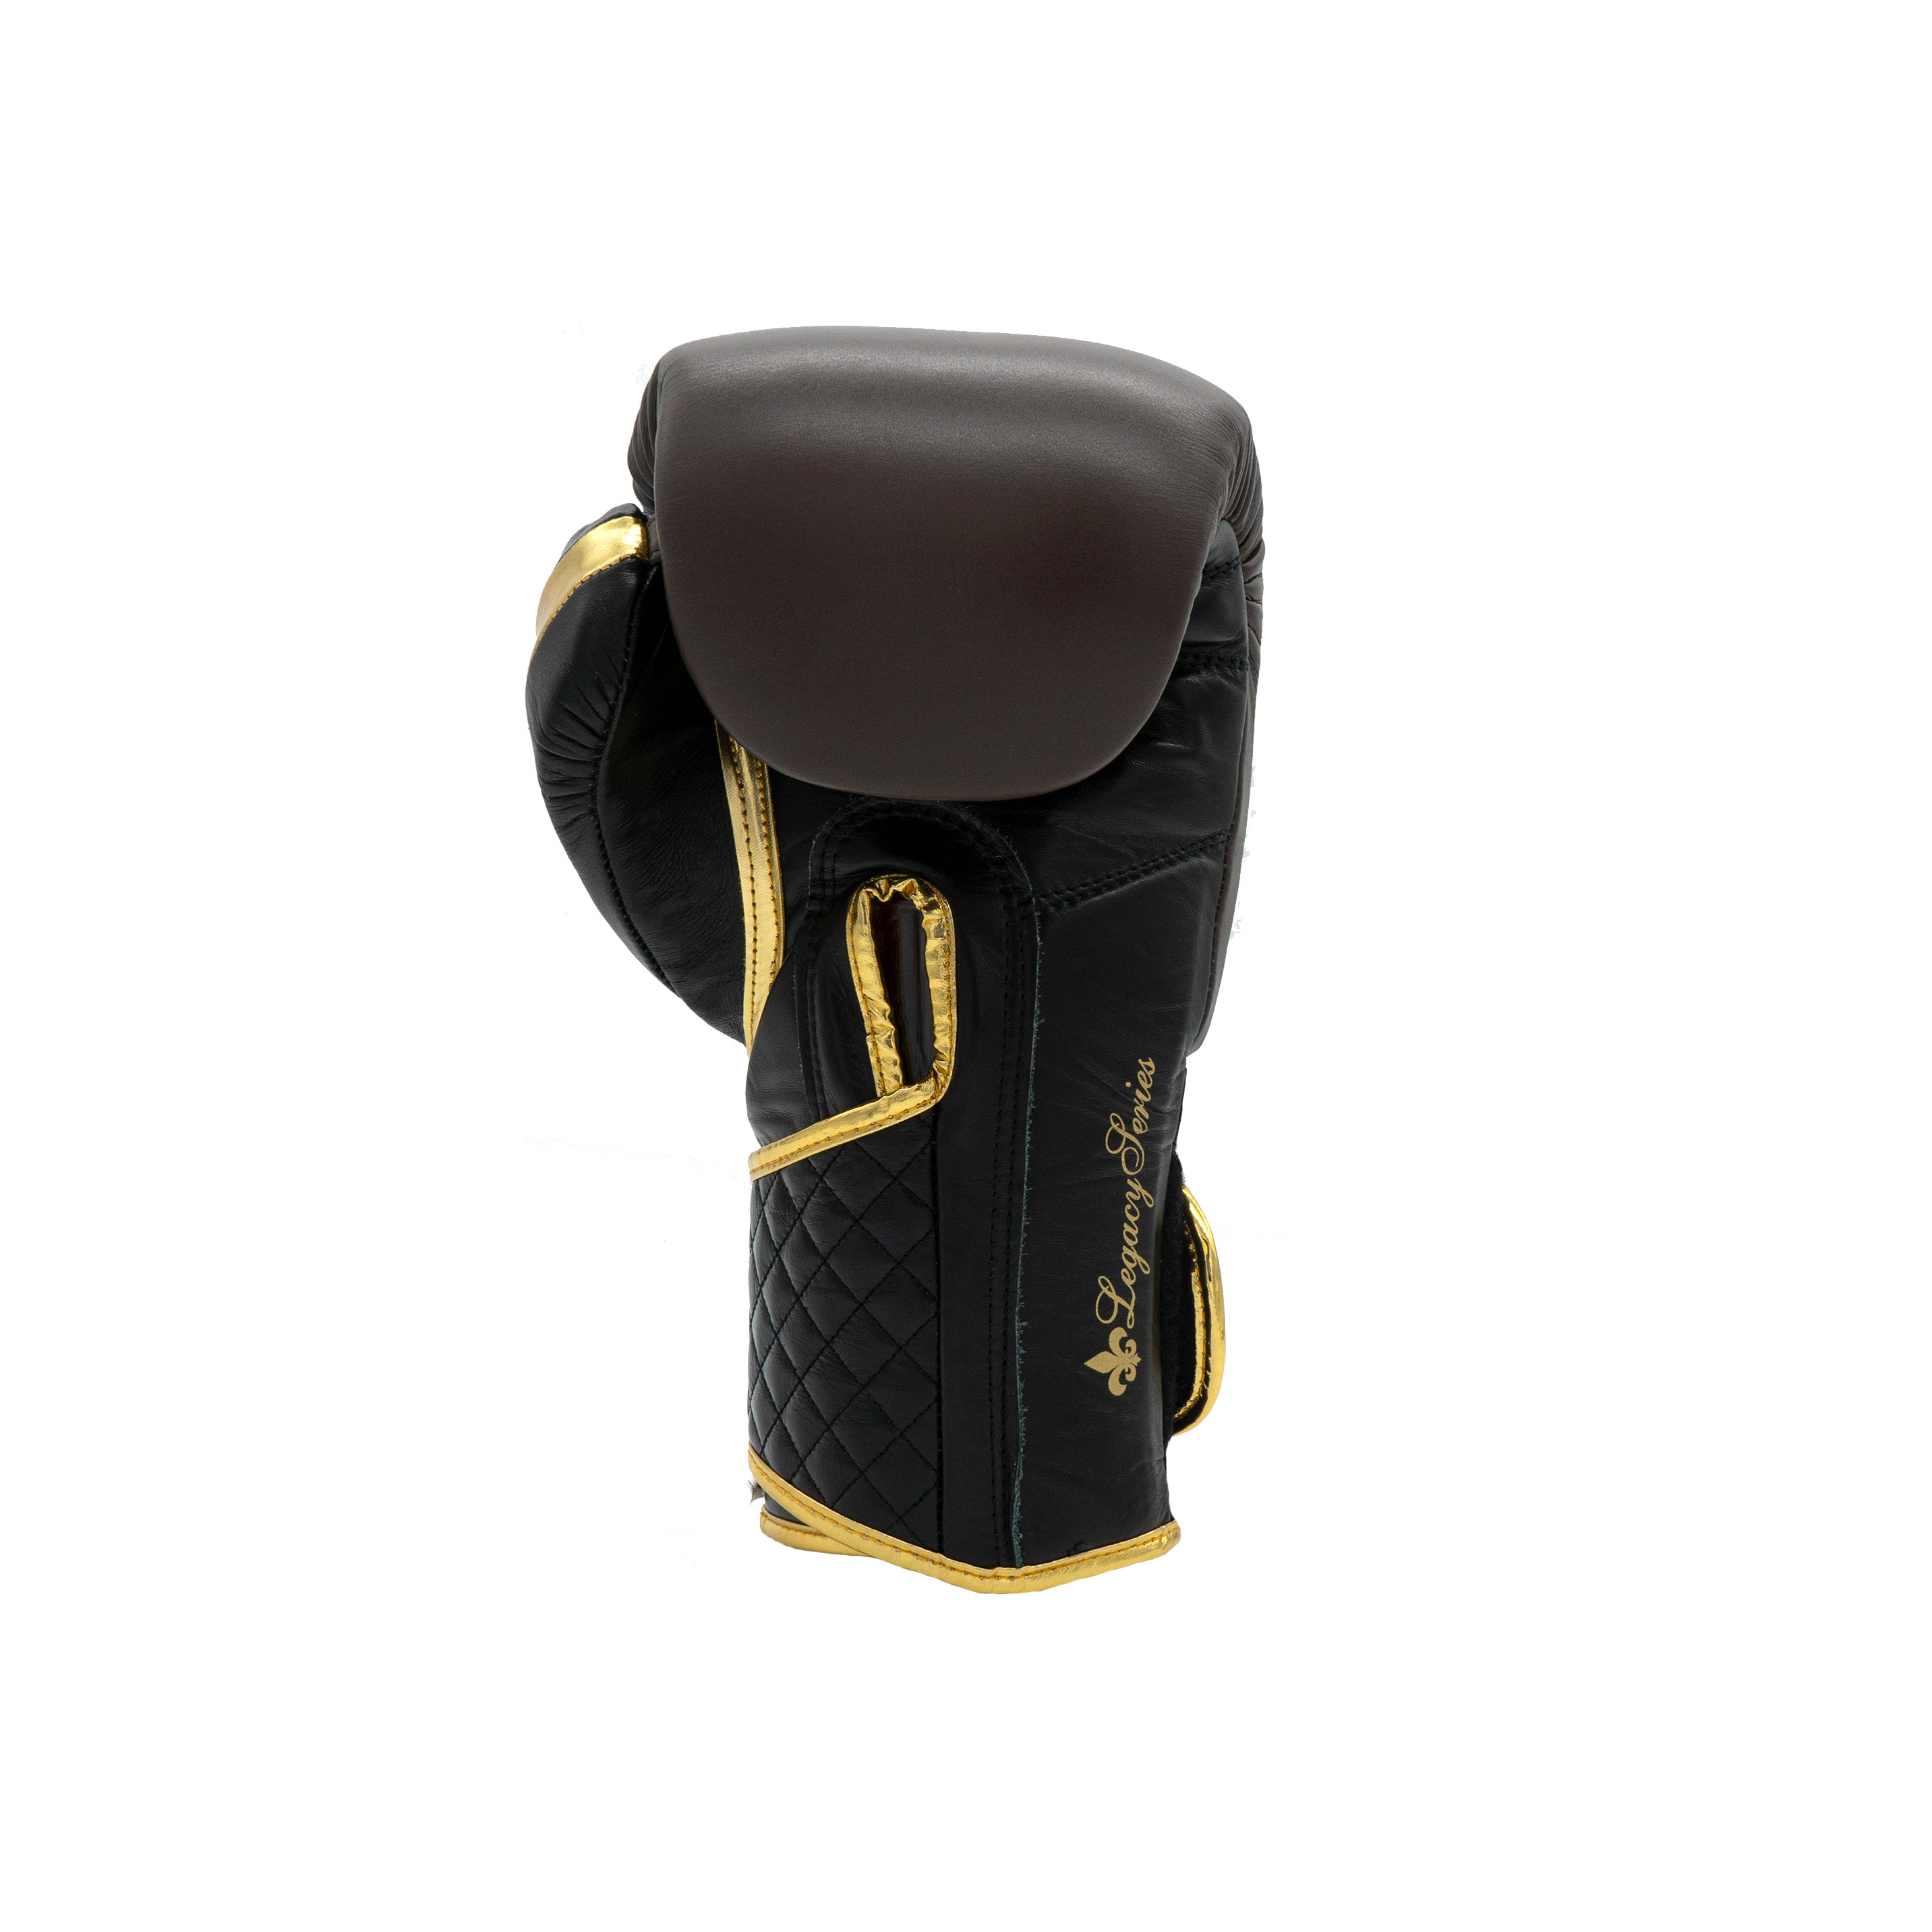 Ringside Boxing UK Legacy Series Strap Boxing Gloves Chocolate Sparring & Training Gloves 